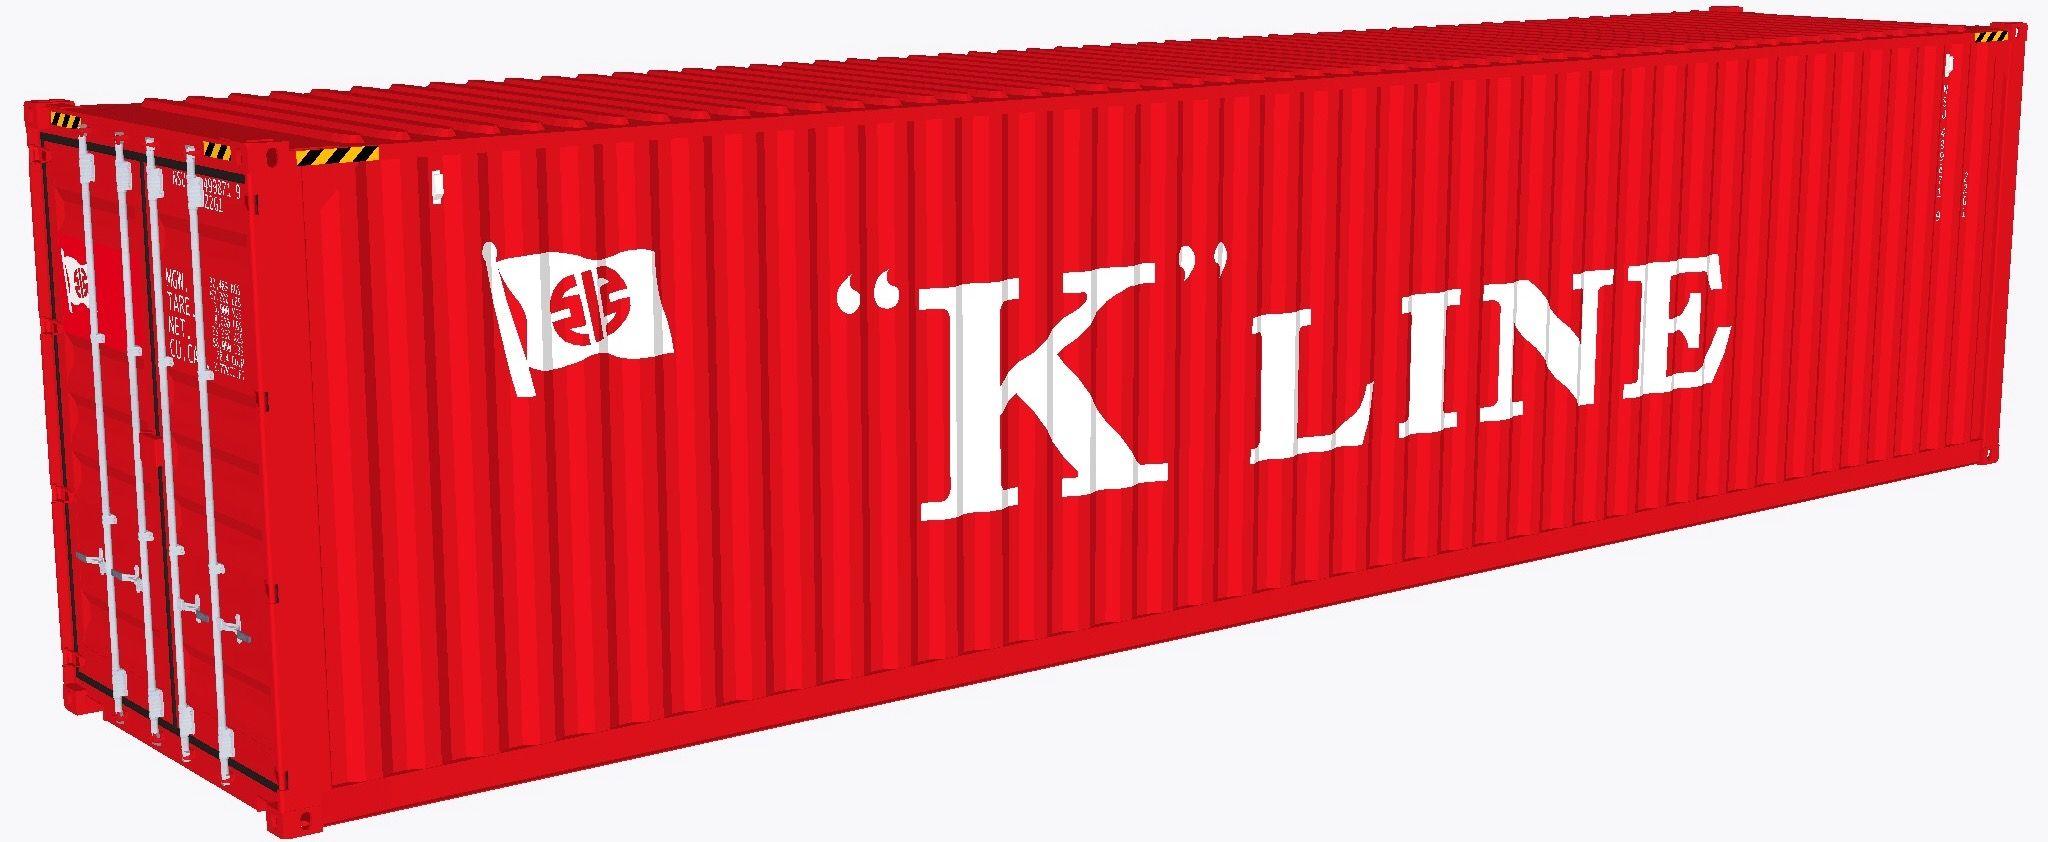 K in Red Rectangle Logo - K Line container.jpeg